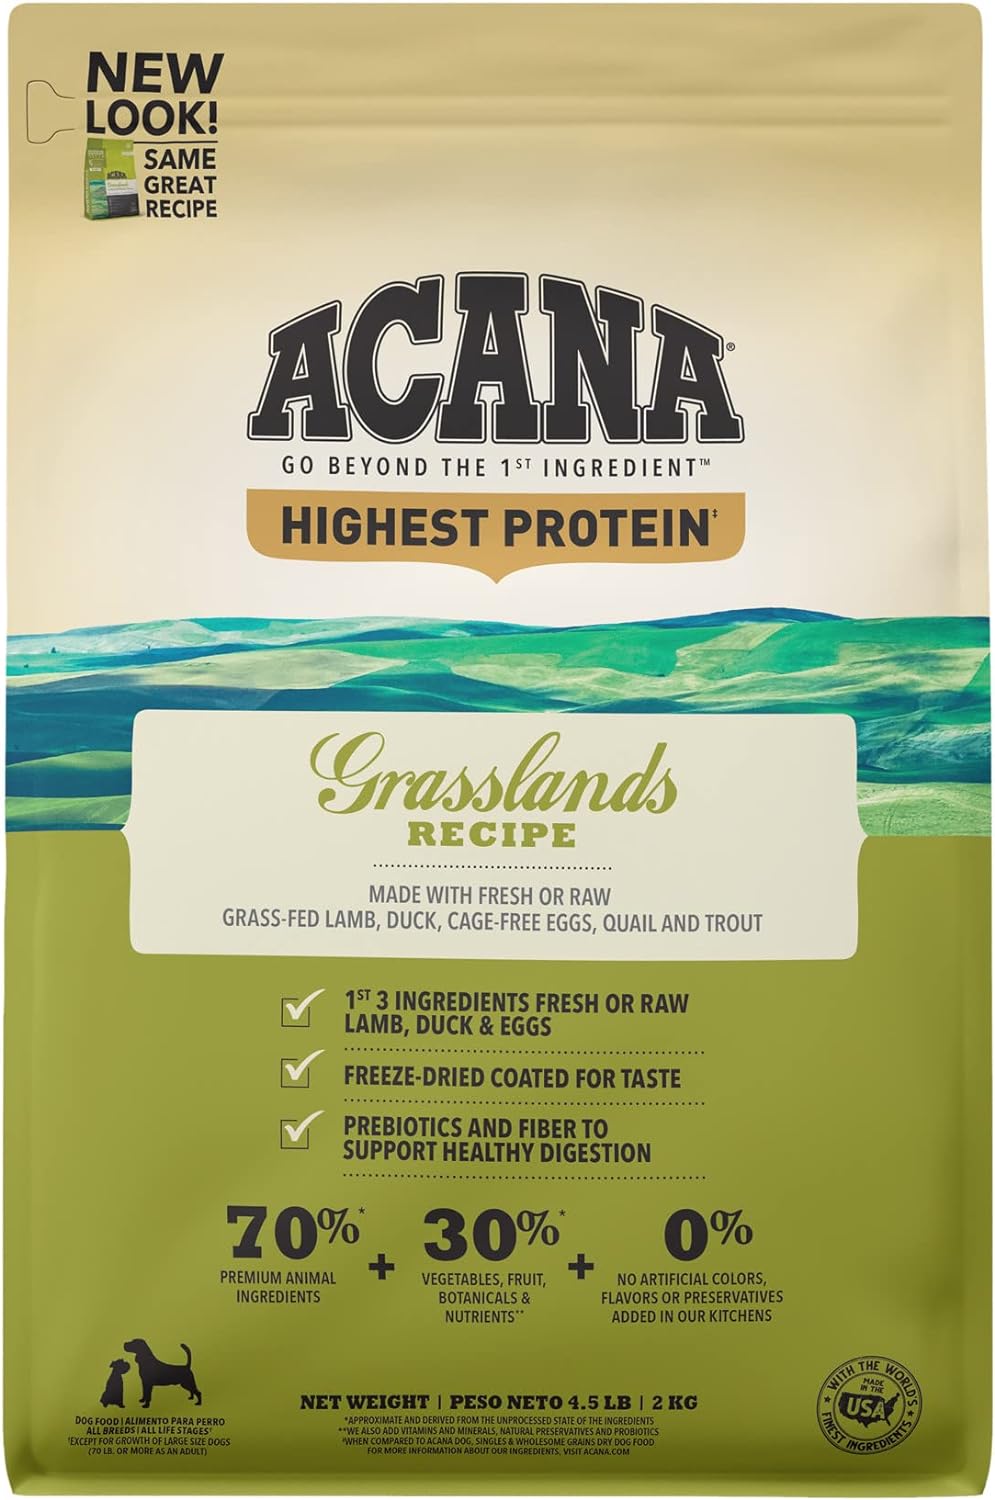 ACANA Highest Protein Dry Dog Food, Grasslands, Lamb and Duck Recipe, 4.5lb